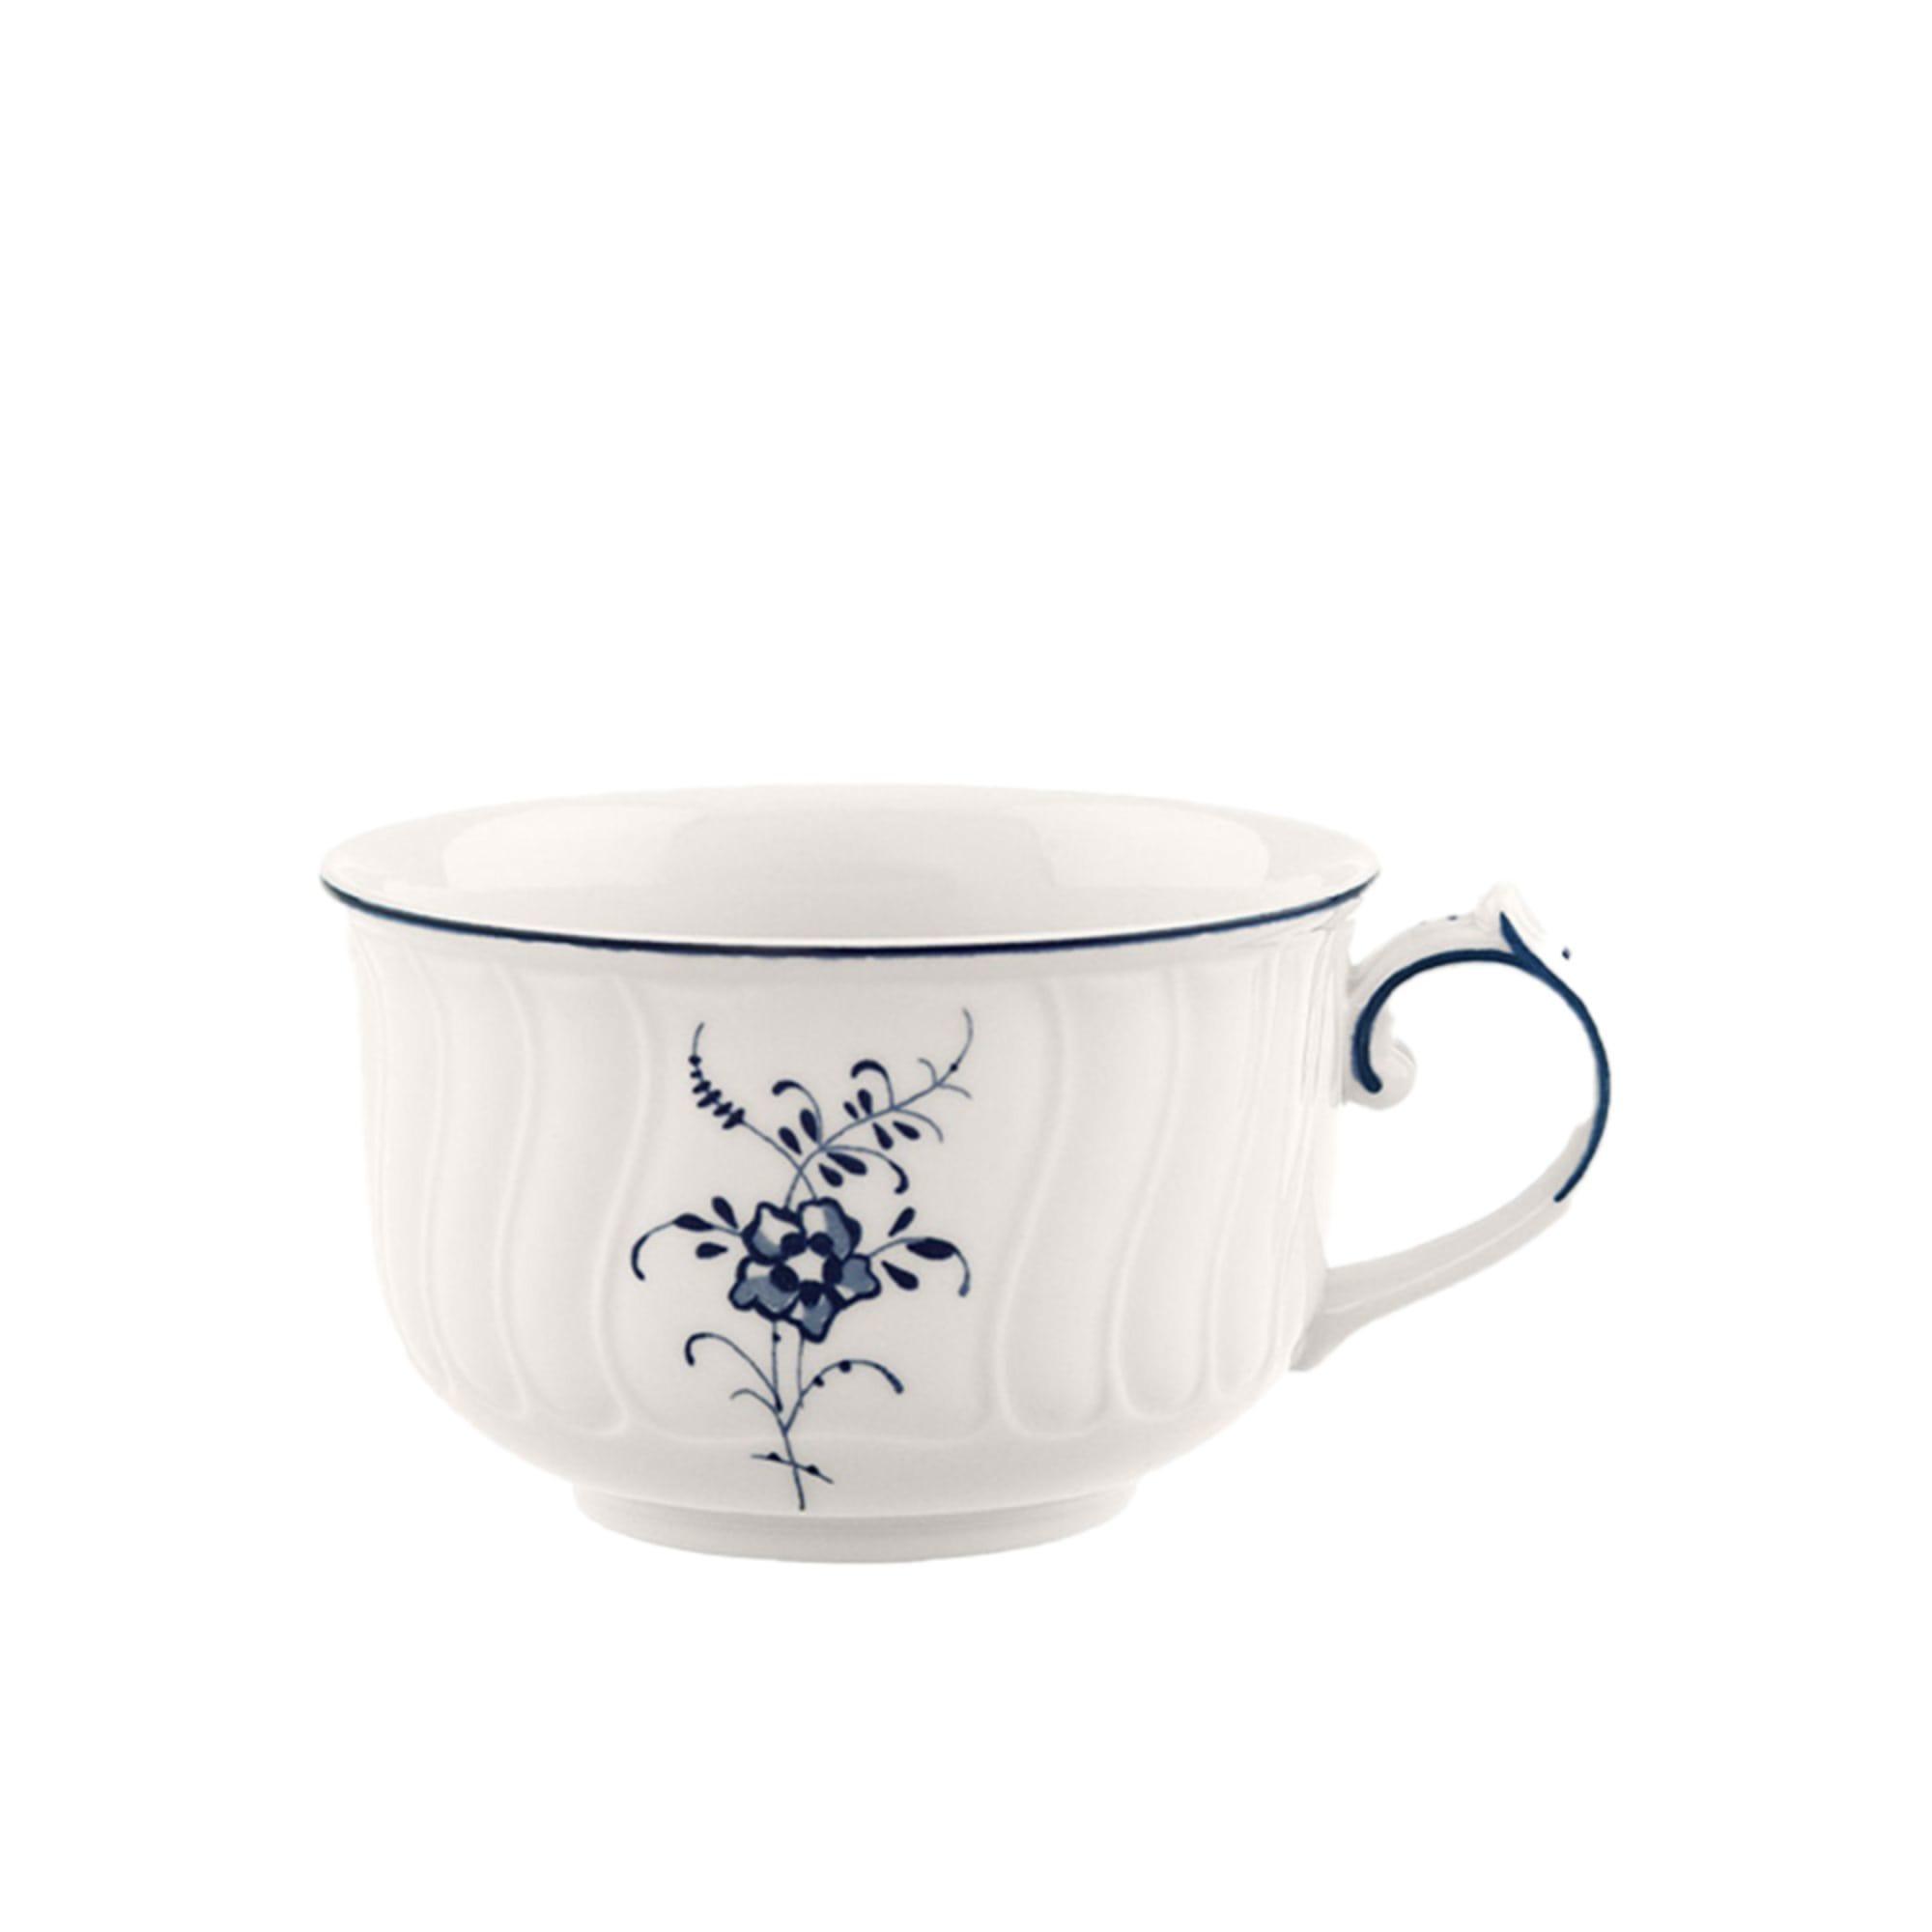 Villeroy & Boch Old Luxembourg Tea Cup 200ml Image 1